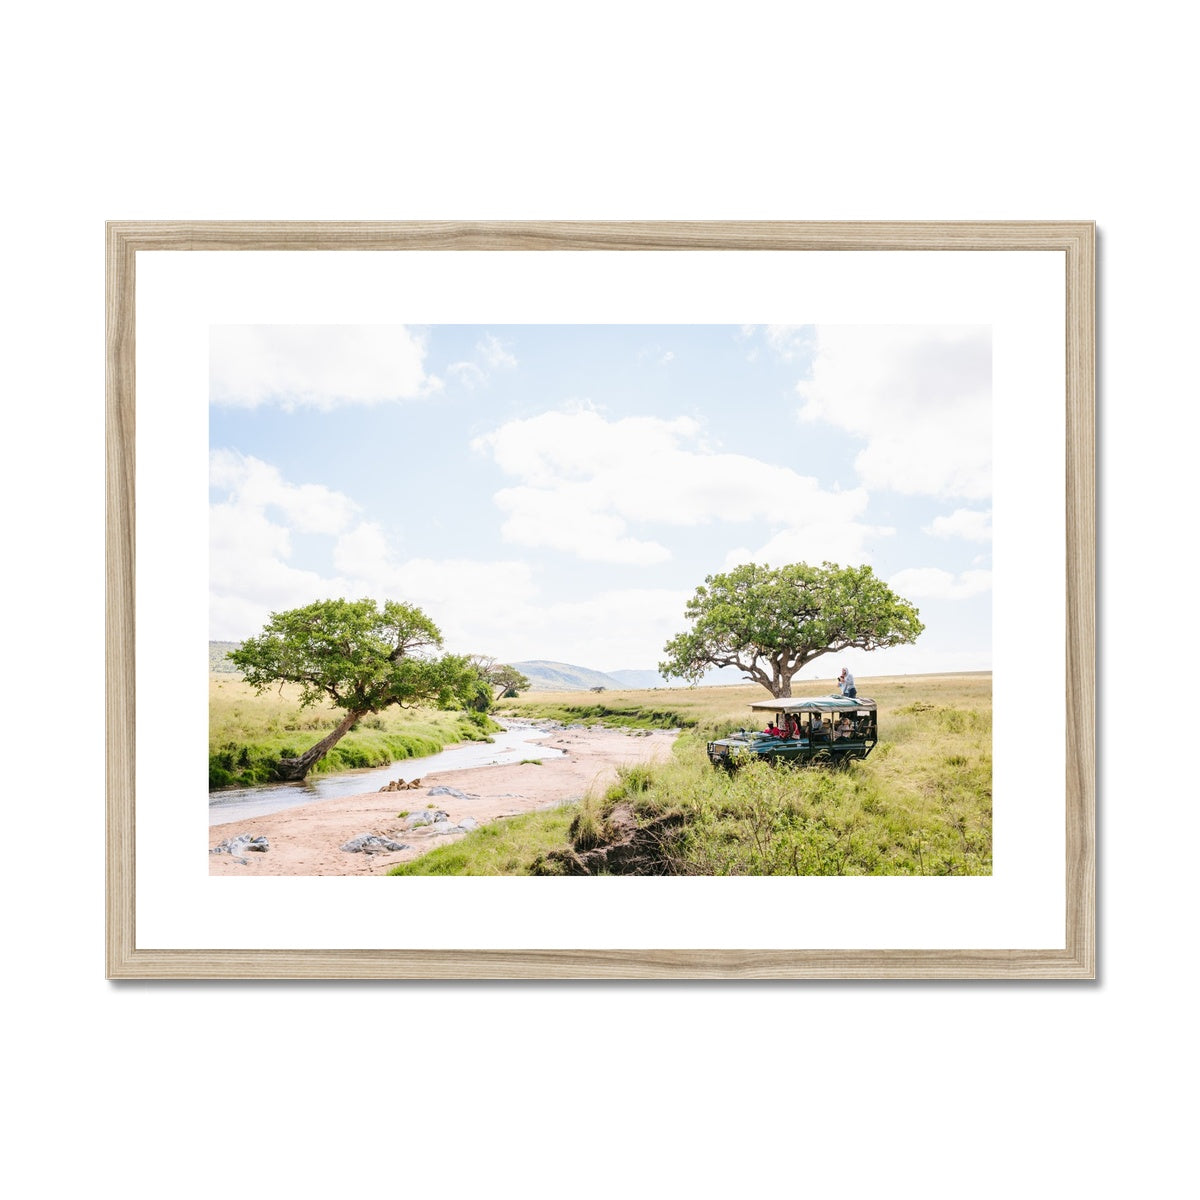 SAFARI JEEP OVERLOOKING LIONS Framed & Mounted Print